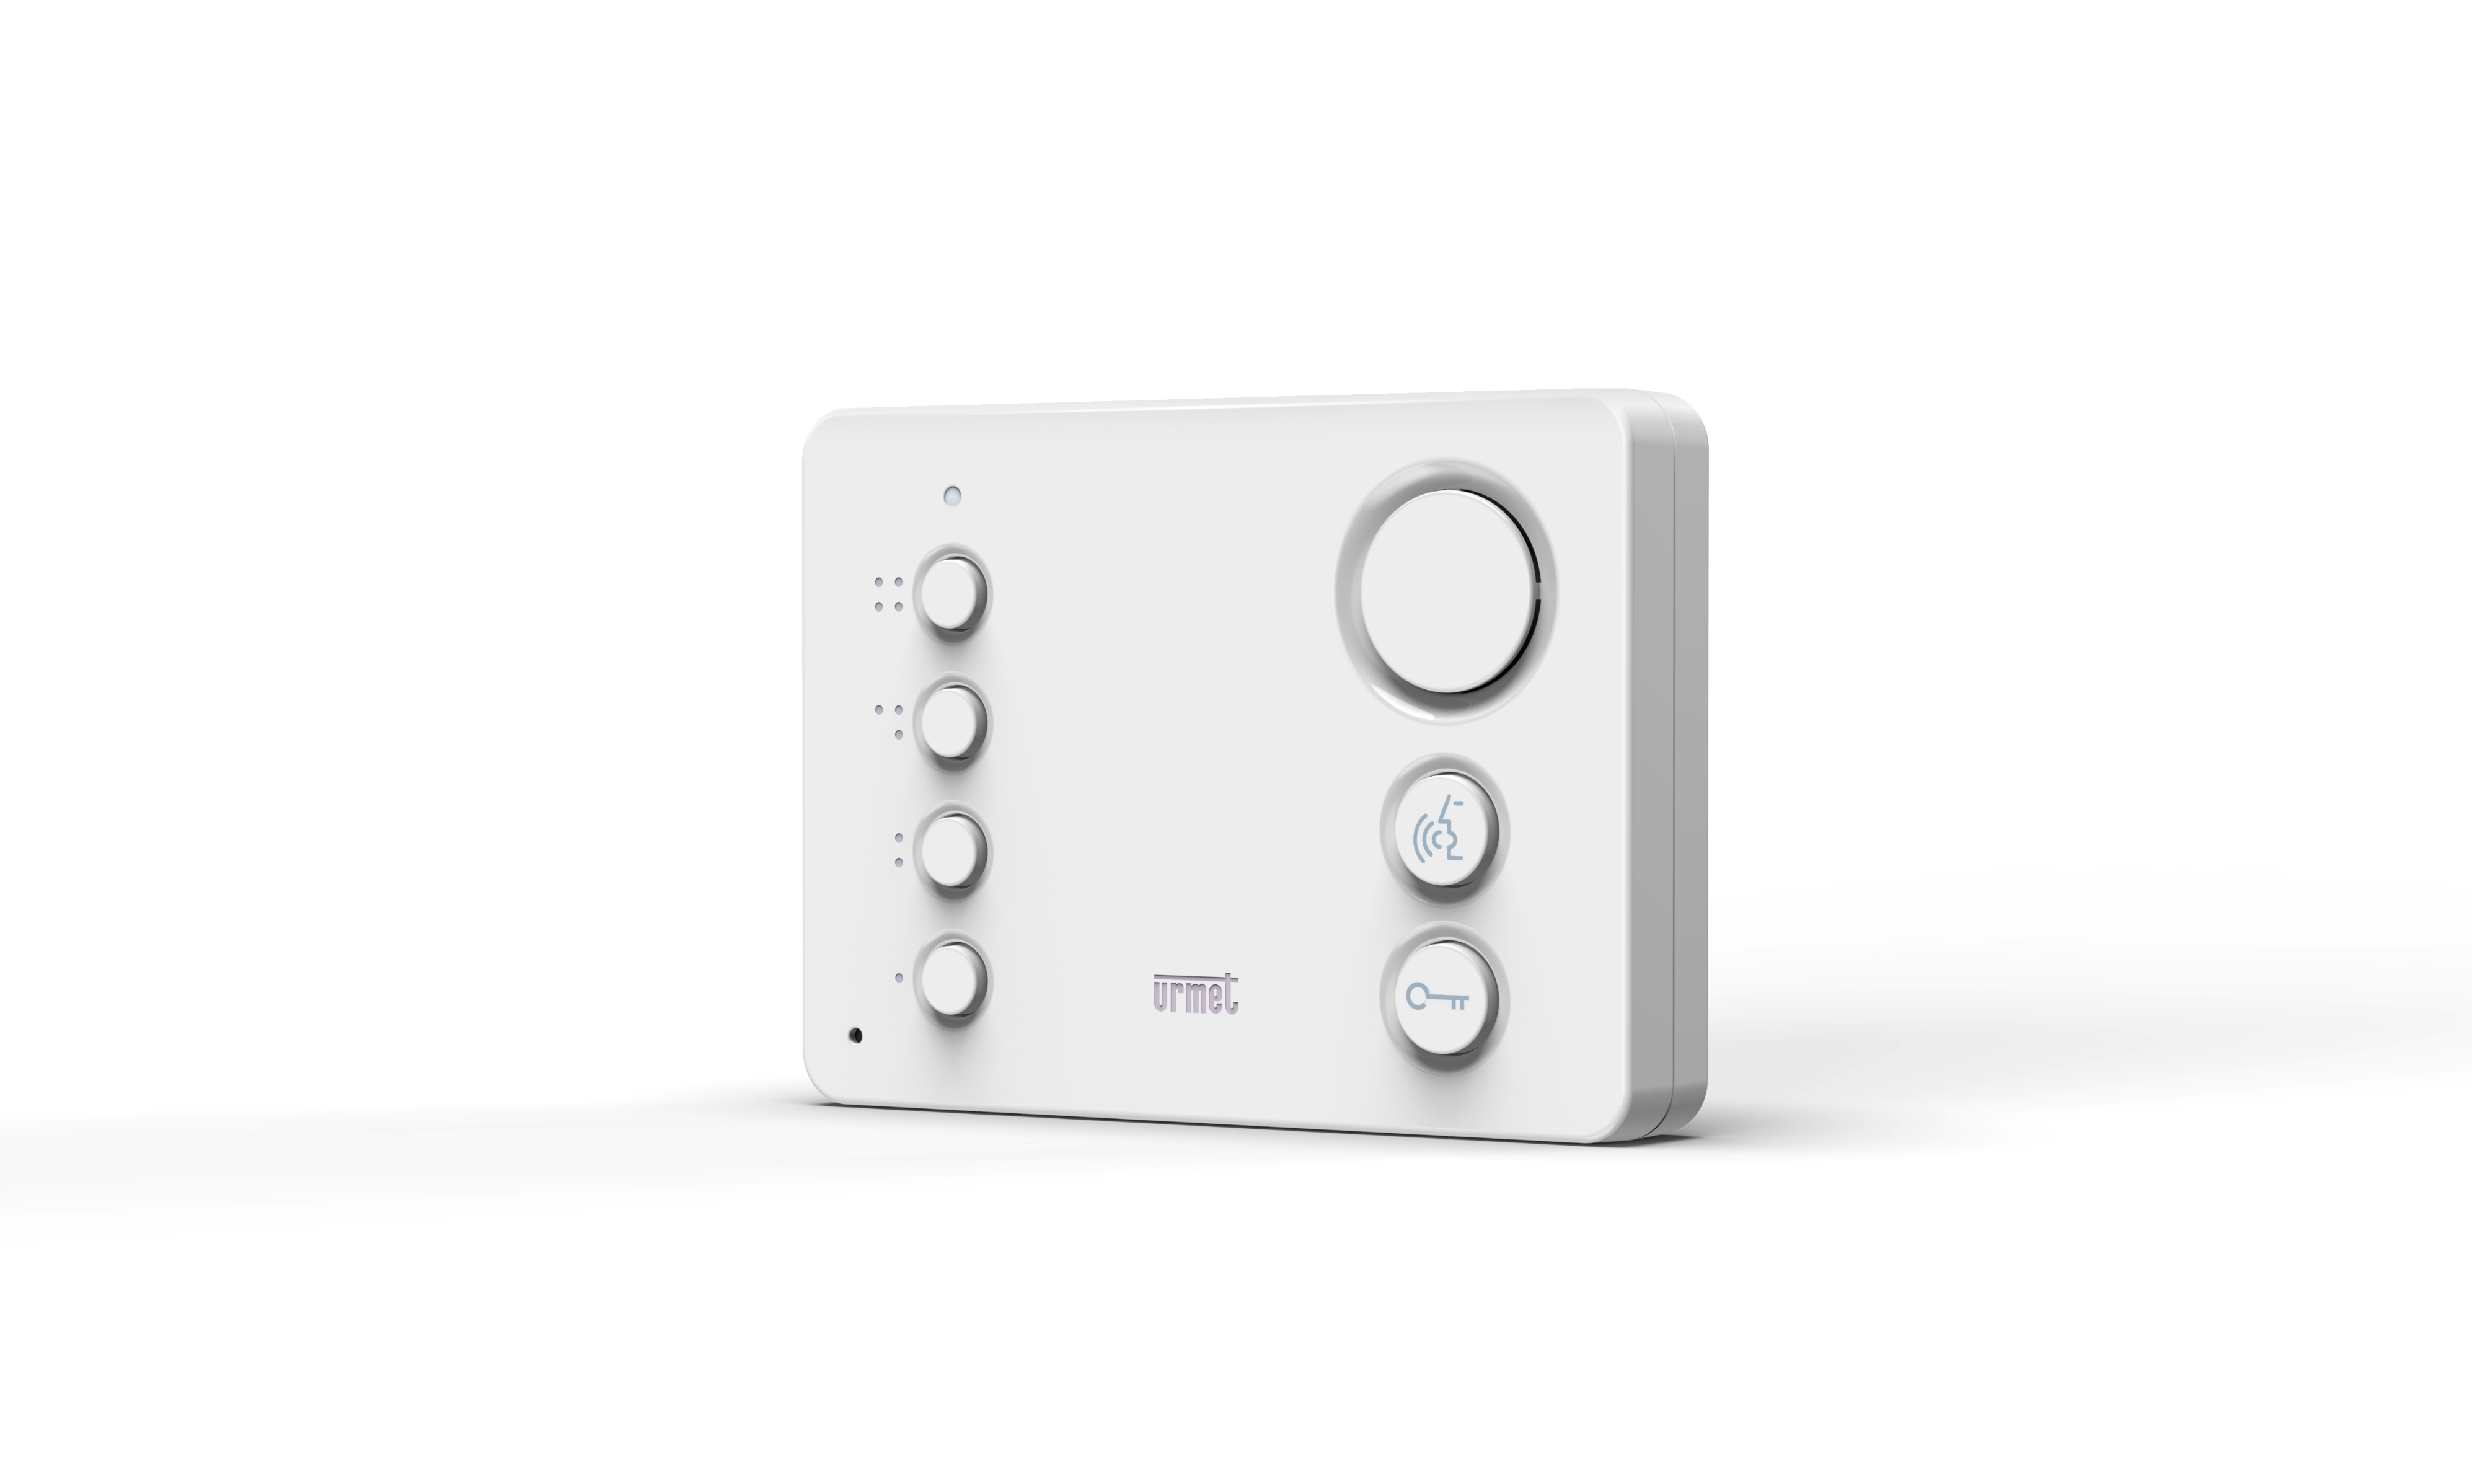 As with all of the Urmet 2-Voice range, integrators using the hands-free MIRO audio station need only work with one twisted pair from a Cat5 cable between the entrance panel and the apartments with no reliance on additional switchgear.